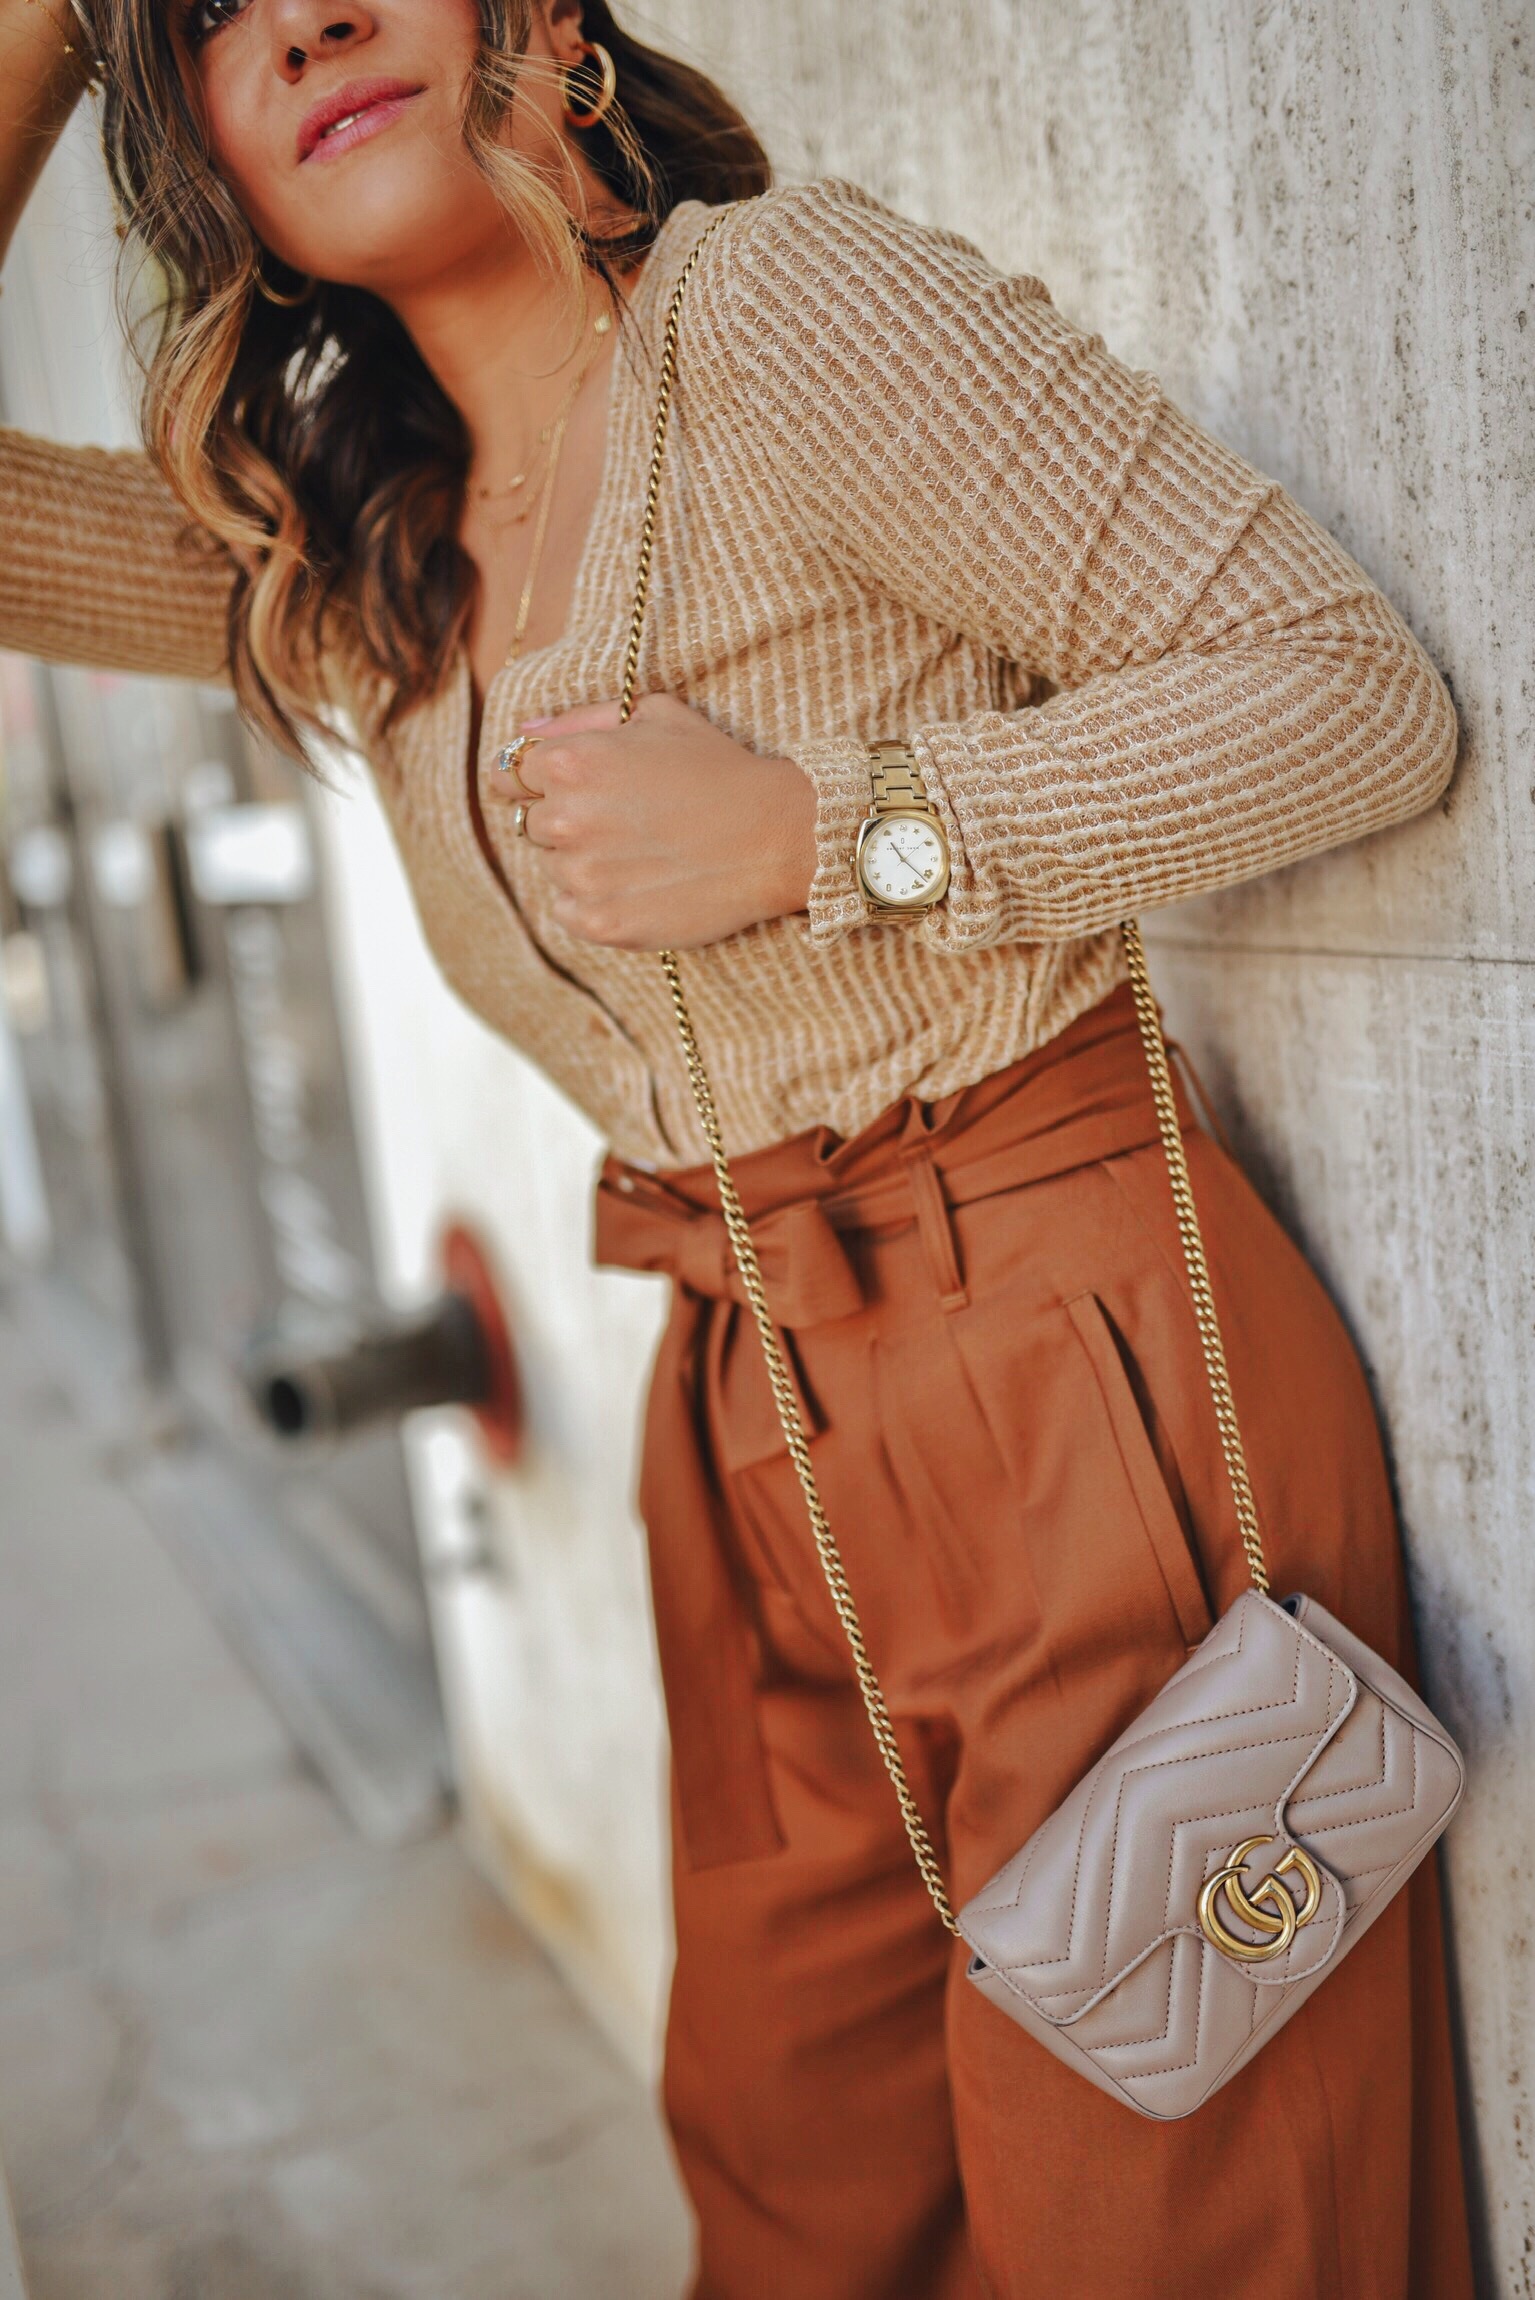 Carolina Hellal of Chic Talk wearing a sweater from the Nordstrom Anniversary Sale, Gucci bag and Sezane high waist pants.